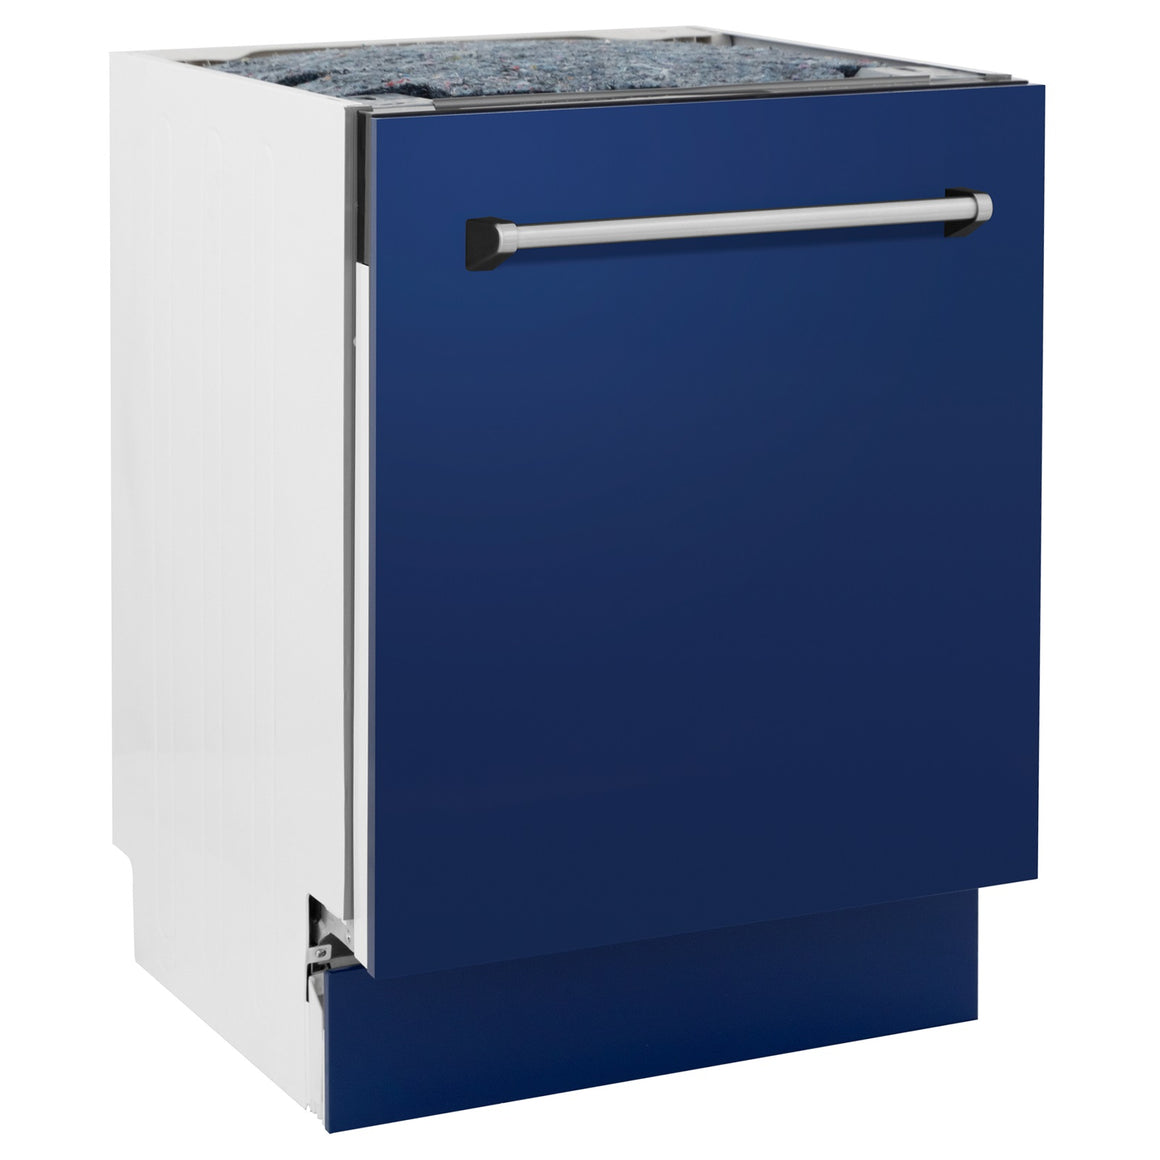 24" Top Control Tall Tub Dishwasher in Blue Gloss with Stainless Steel Tub and 3rd Rack (DWV-BG-24)